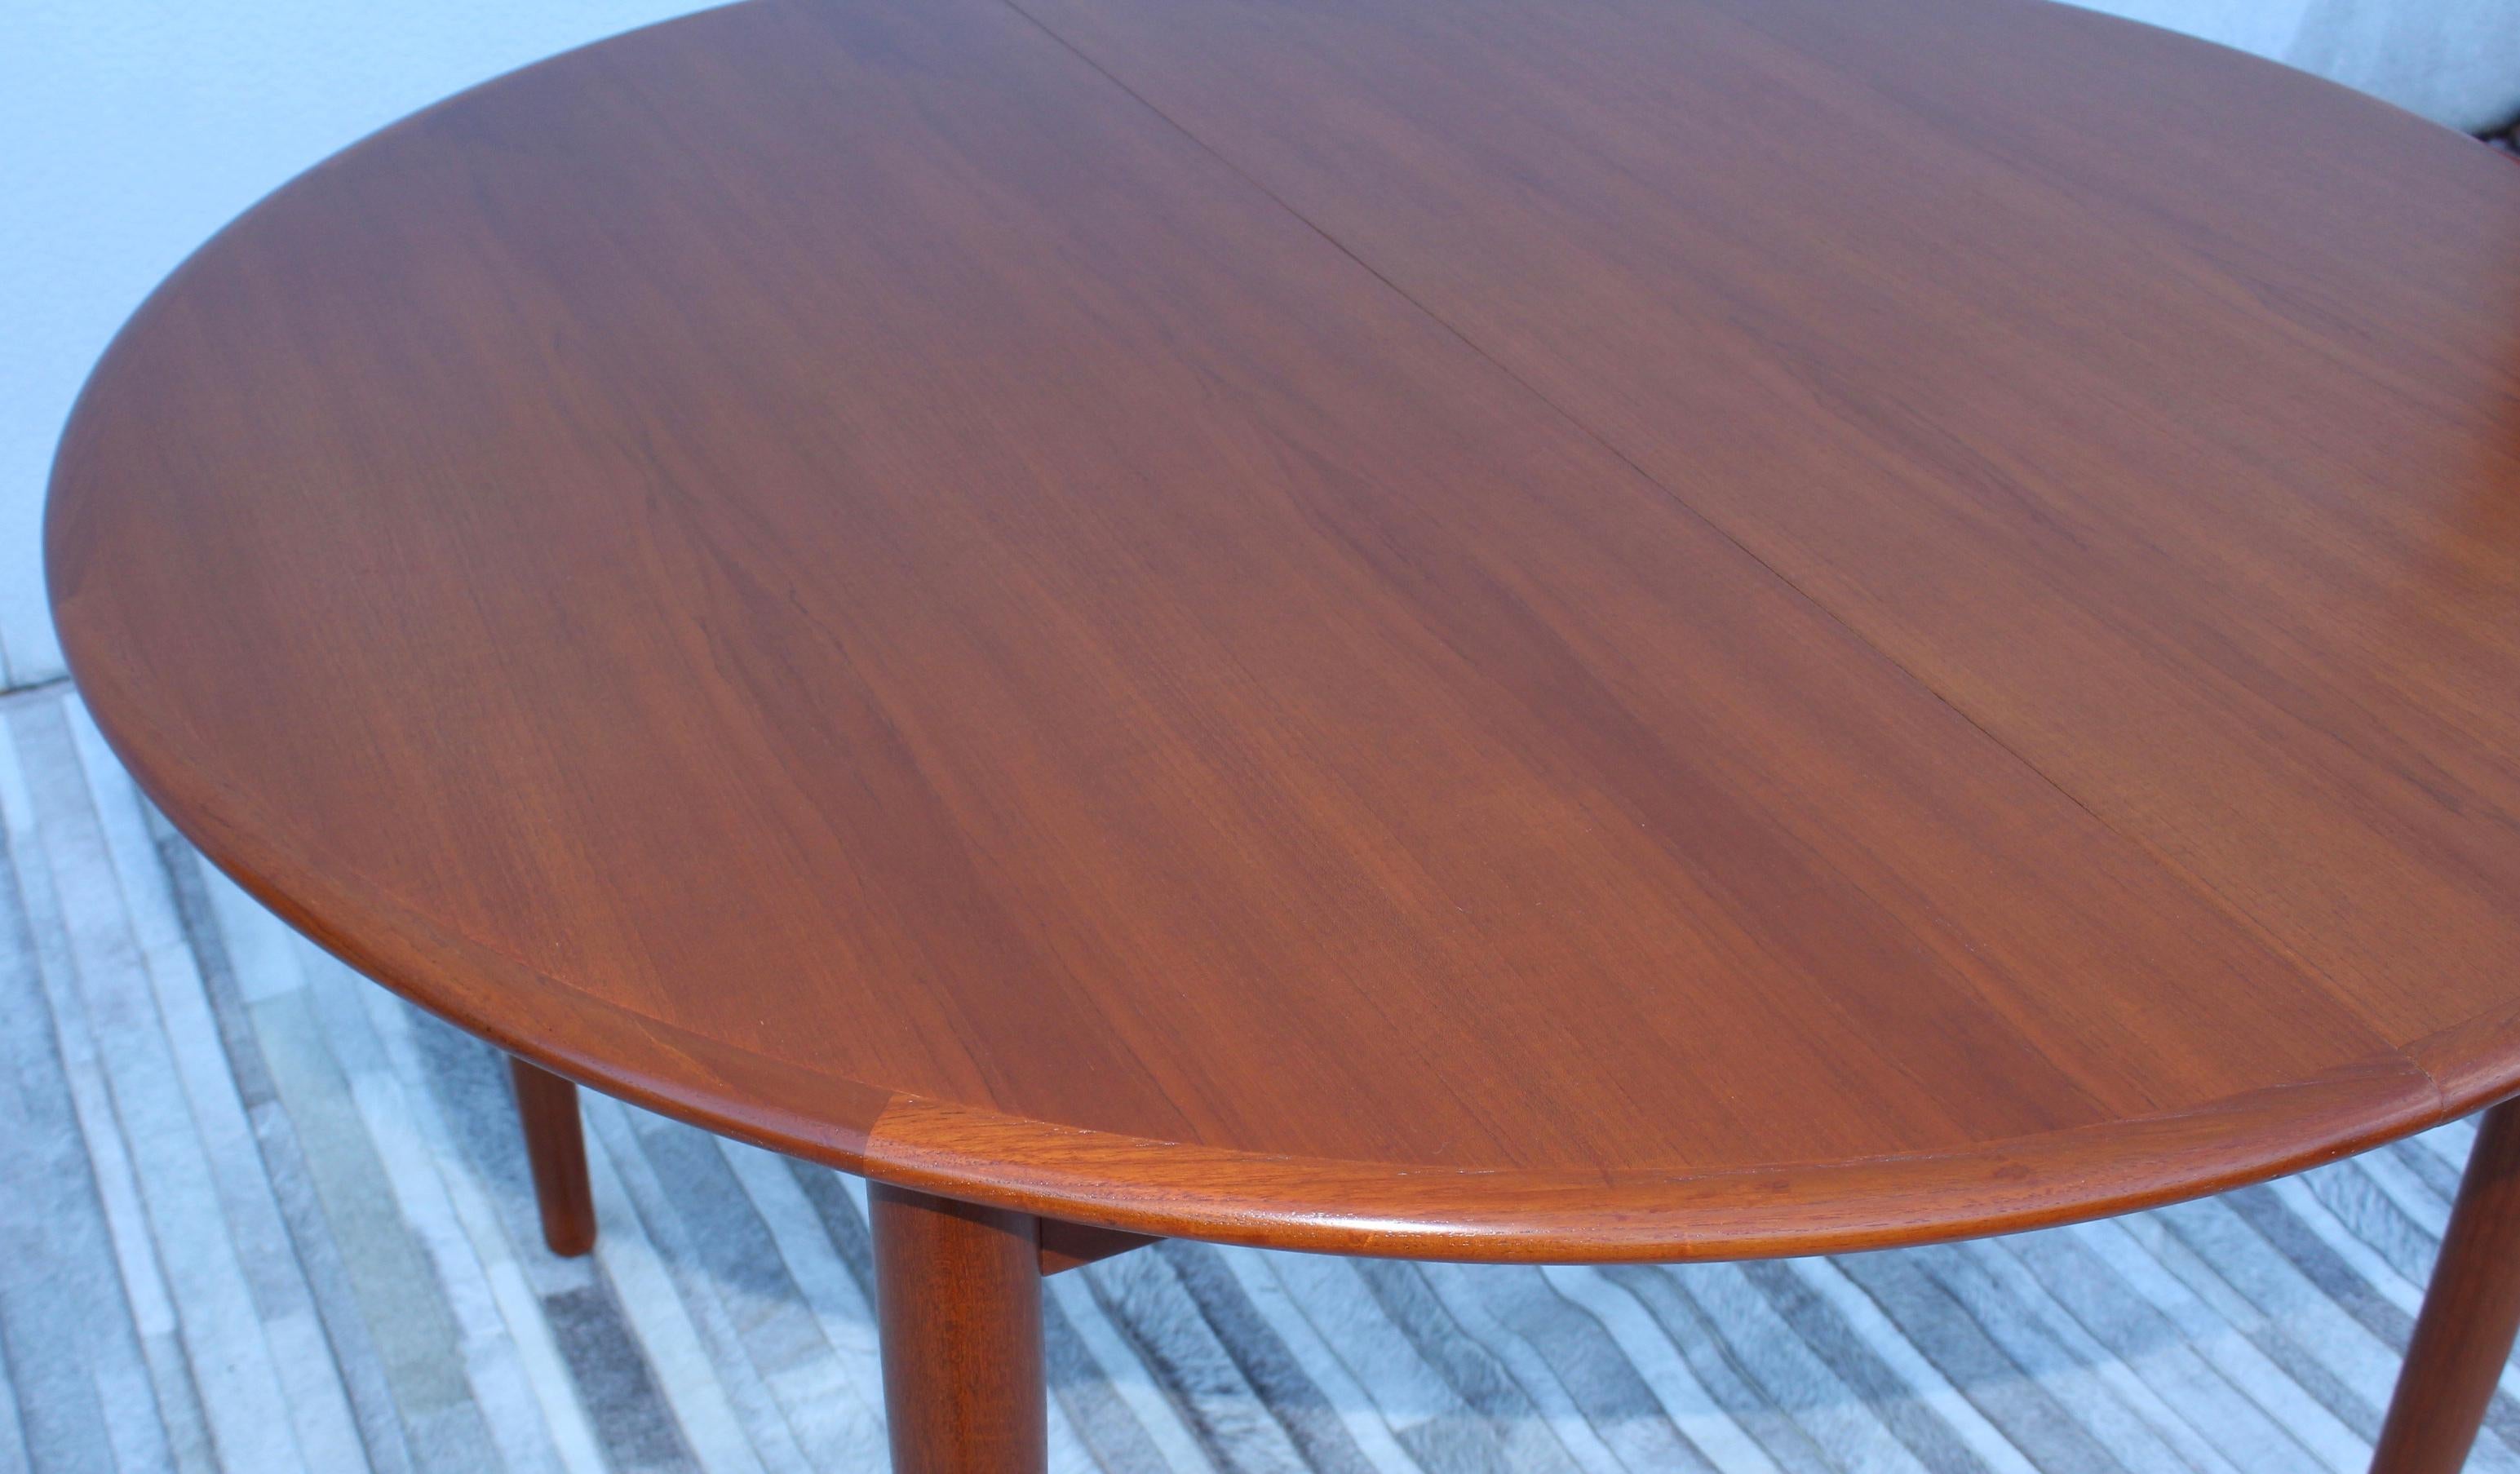 1960's Mid-Century Modern Danish Teak Round Dining Table with Two Leaves 4